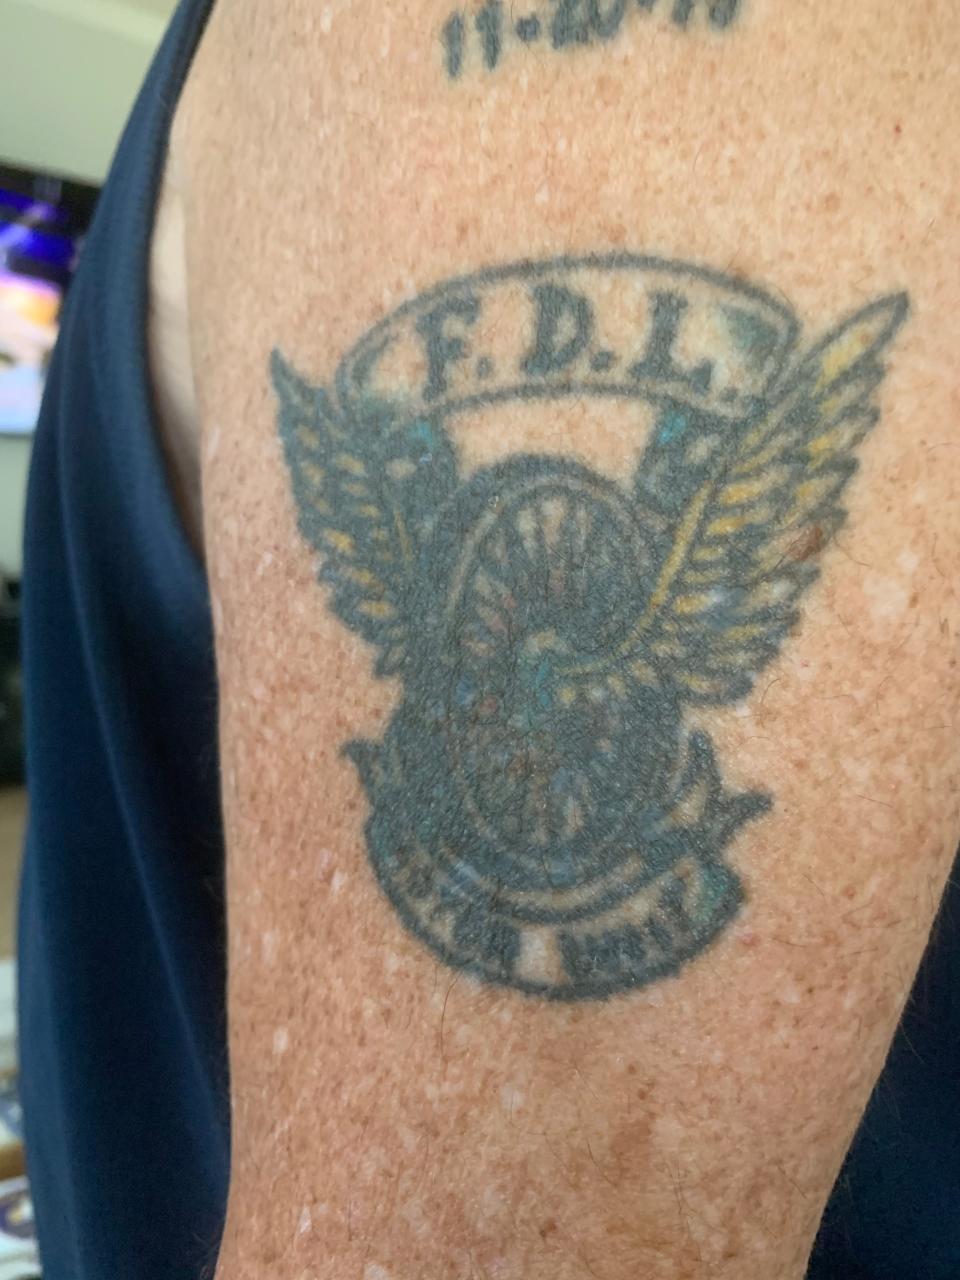 Former police officer Mick Burroughs has a tattoo from when the Fond du Lac Police Department developed the police mobile unit in 2000.